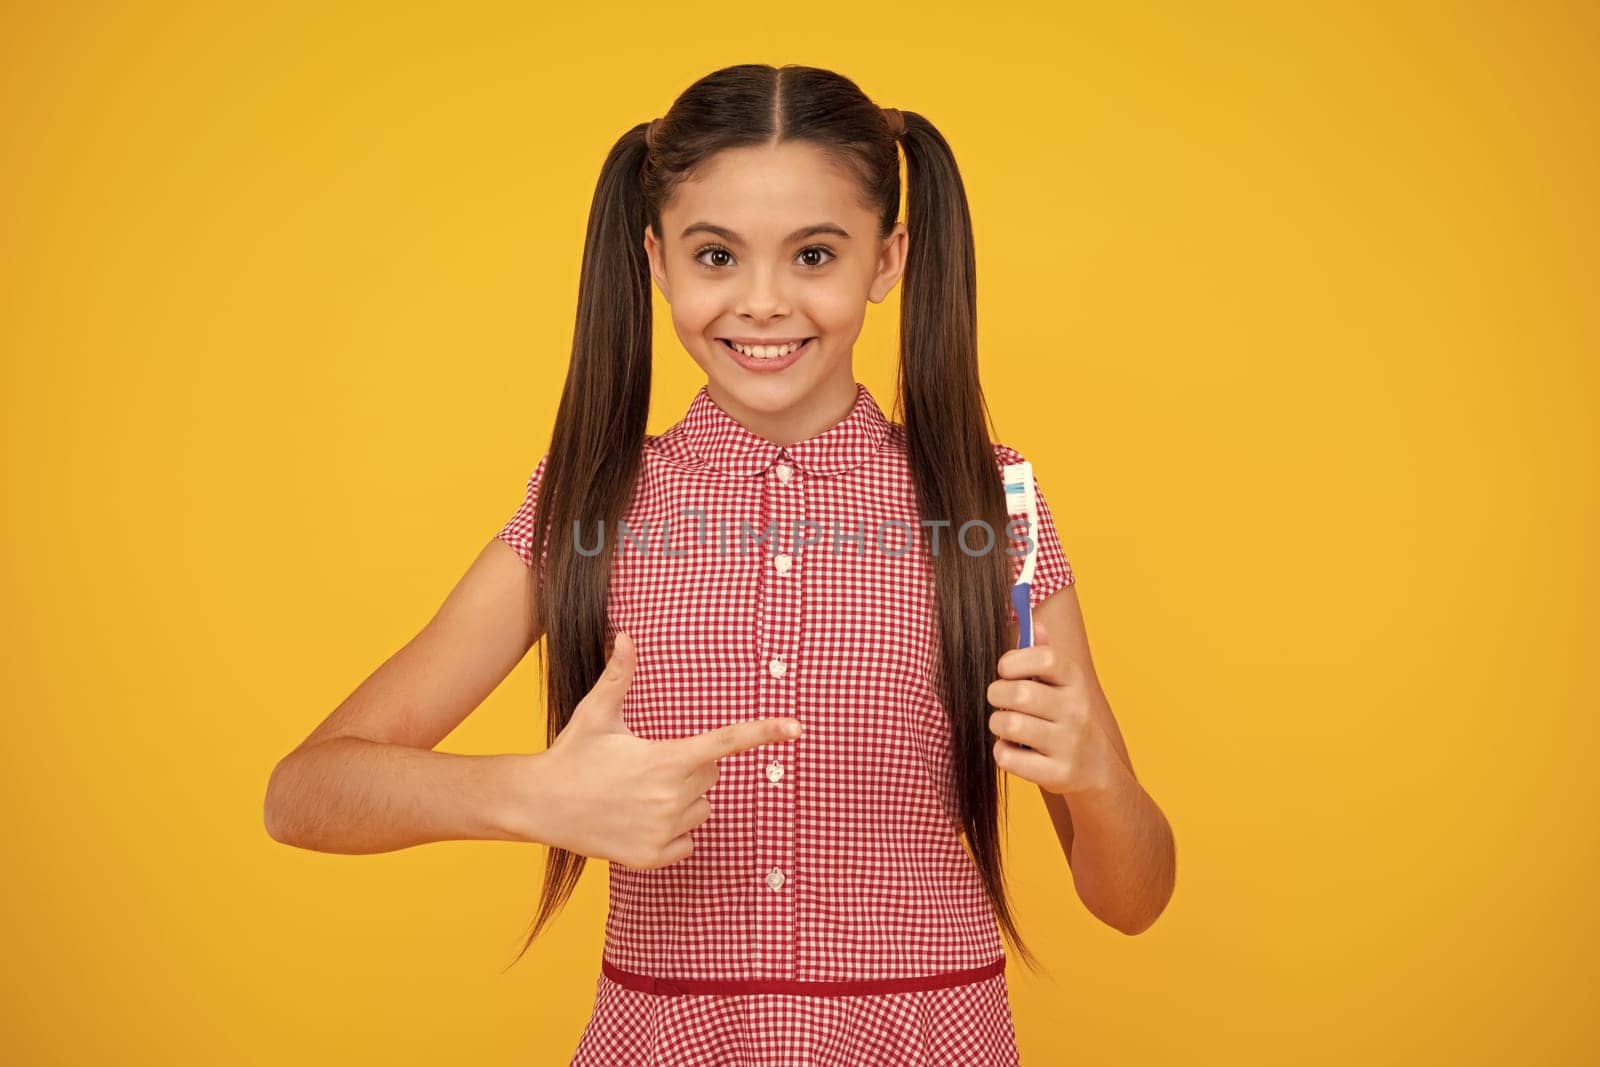 Girl cleans her teeth with a brush. Portrait beautiful teen holding toothbrush brushing teeth isolated on yellow background, Dental health concept. Happy teenager, positive and smiling emotions by RedFoxStudio